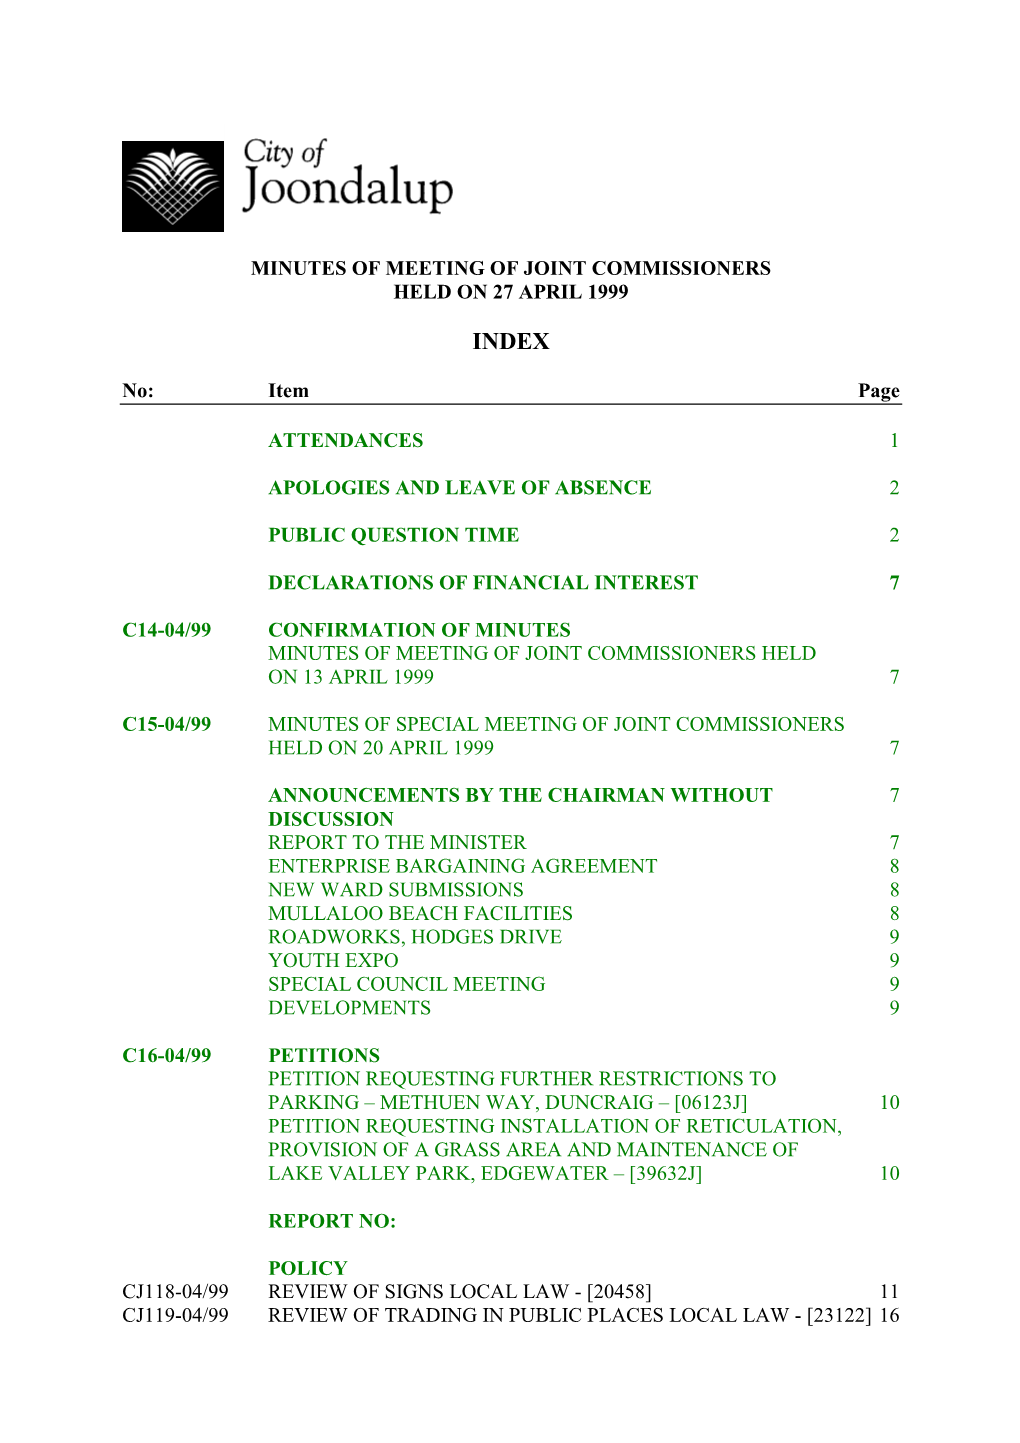 Minutes of Meeting of Joint Commissioners Held on 27 April 1999